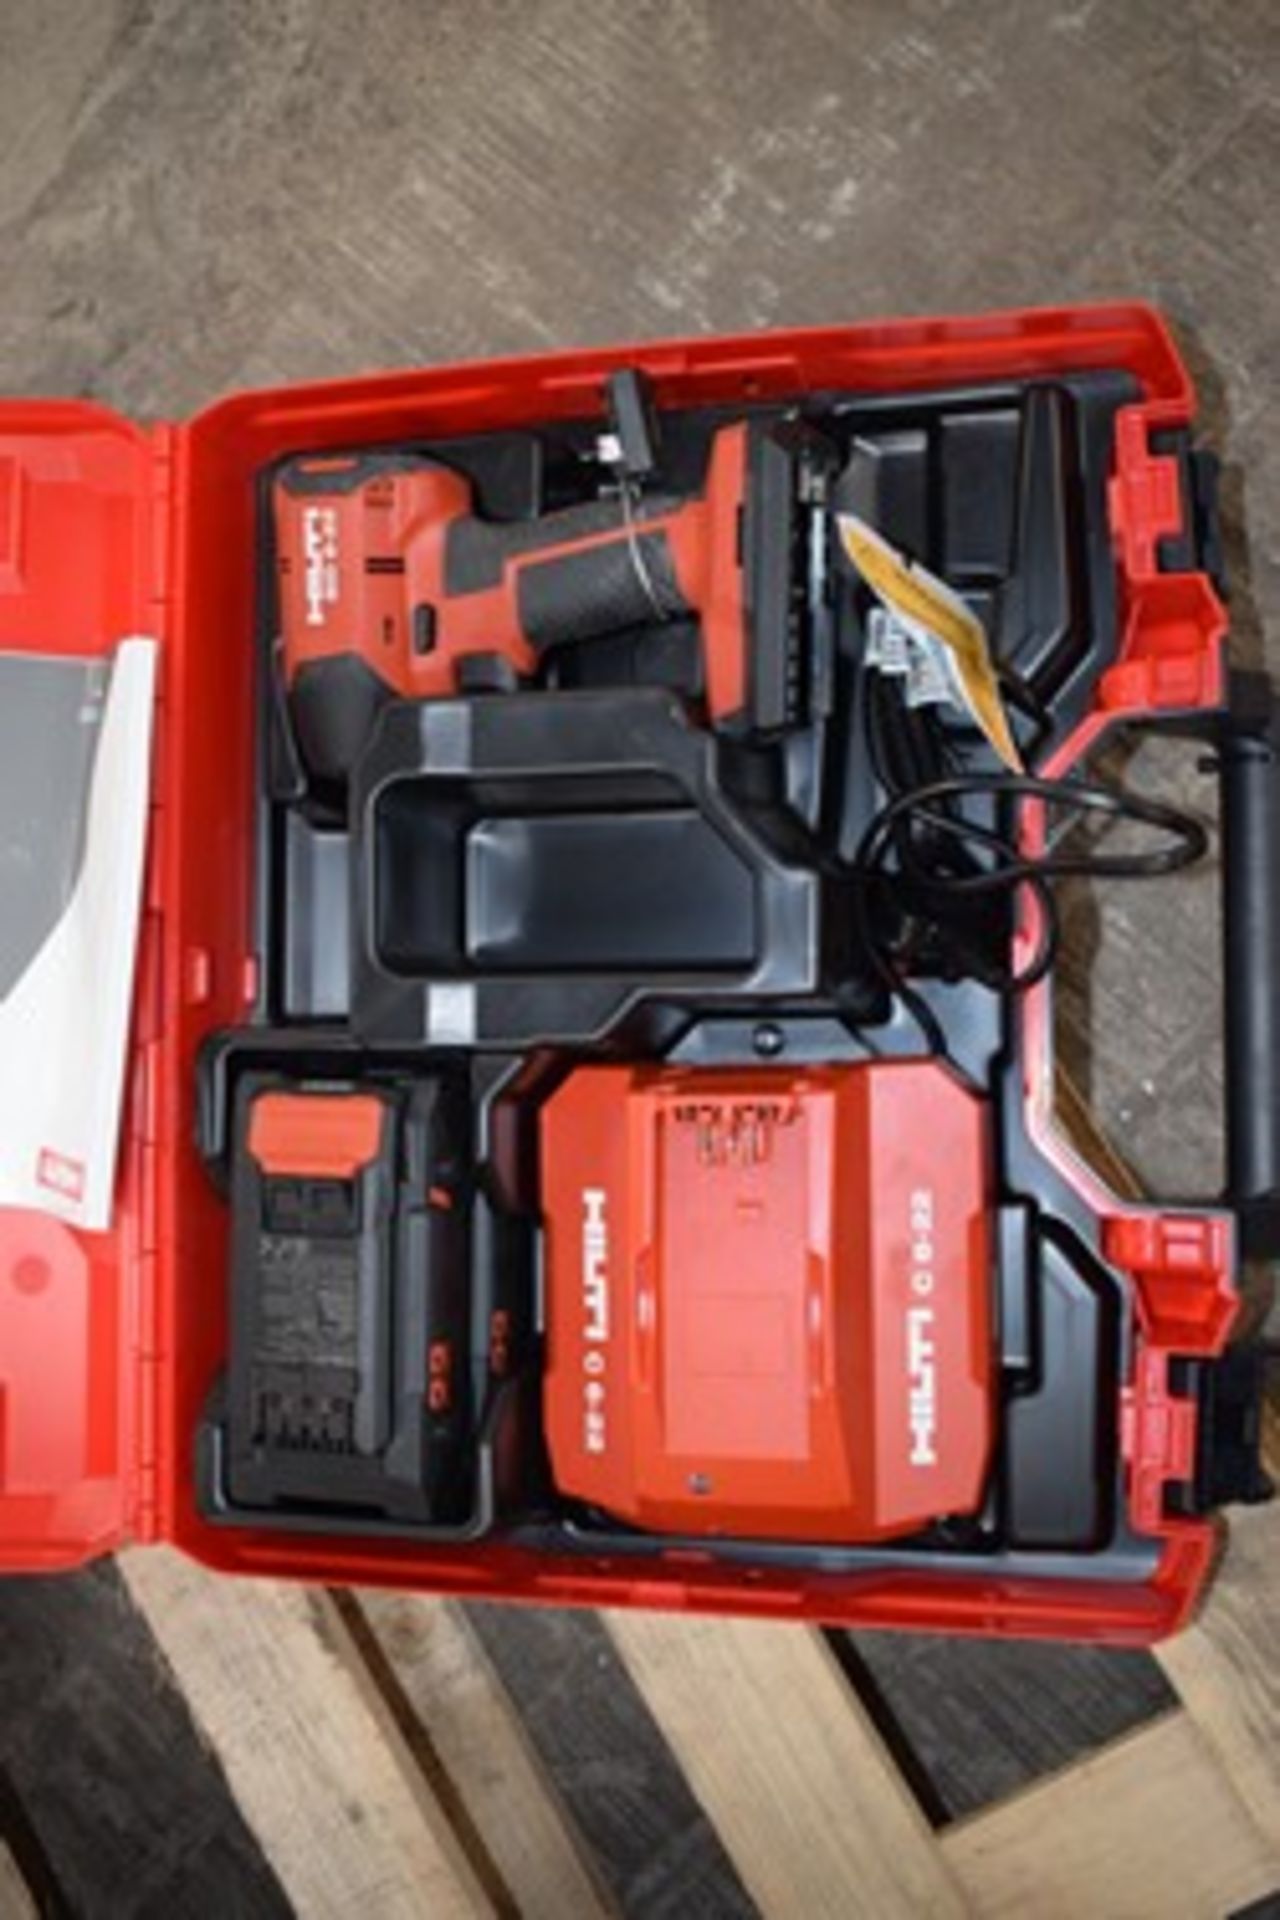 1 x Hilti impact 1/2 cordless nut runner, Model SID 6-22 with 22 battery, charger (case damaged),